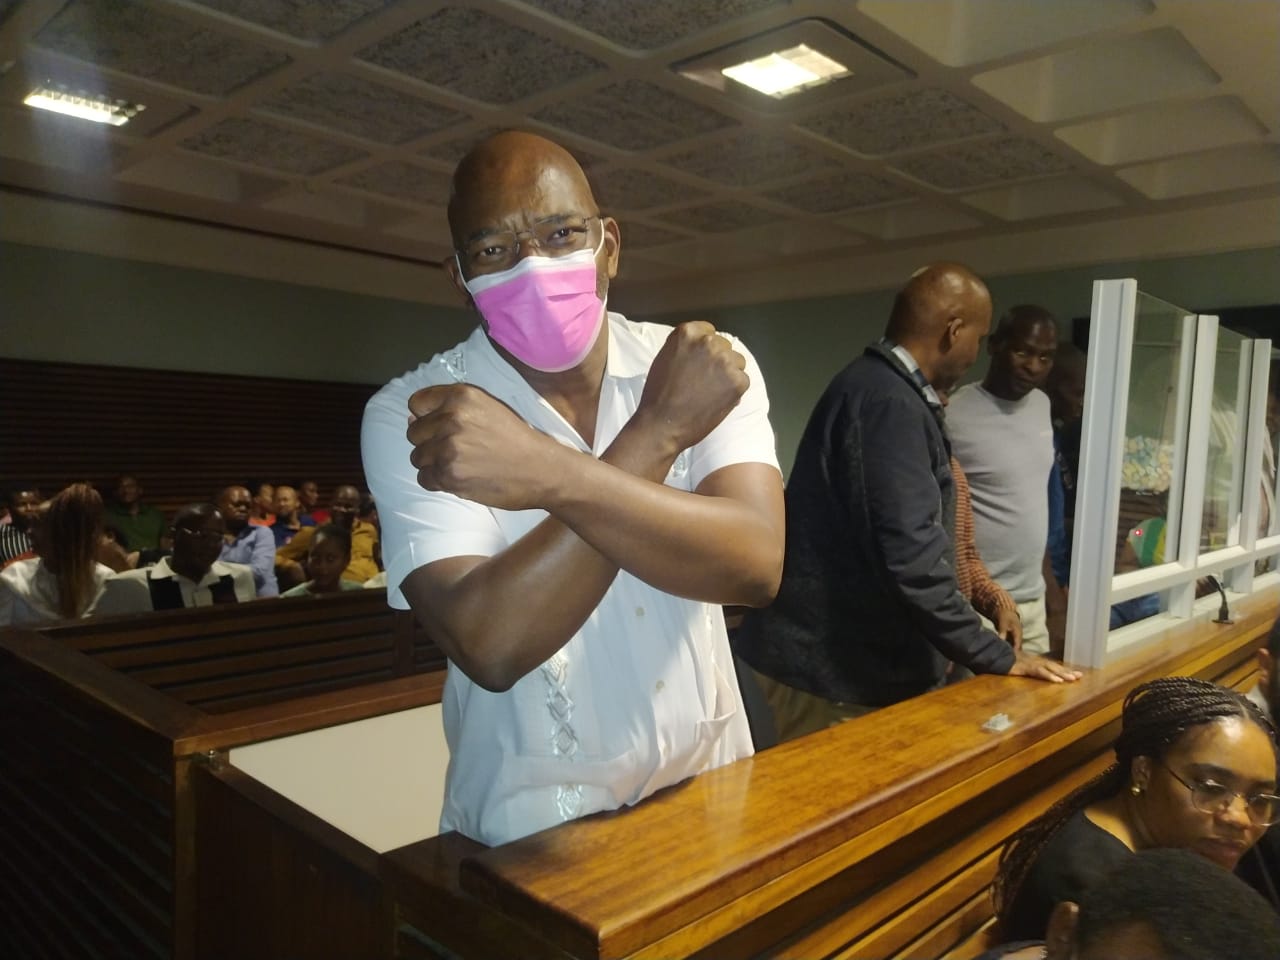 FORMER HOD AND CFO OF THE DEPARTMENT OF HEALTH APPEAR IN COURT FOR ANOTHER PPE-RELATED MATTER AMOUNTING TO 26.9 MILLION